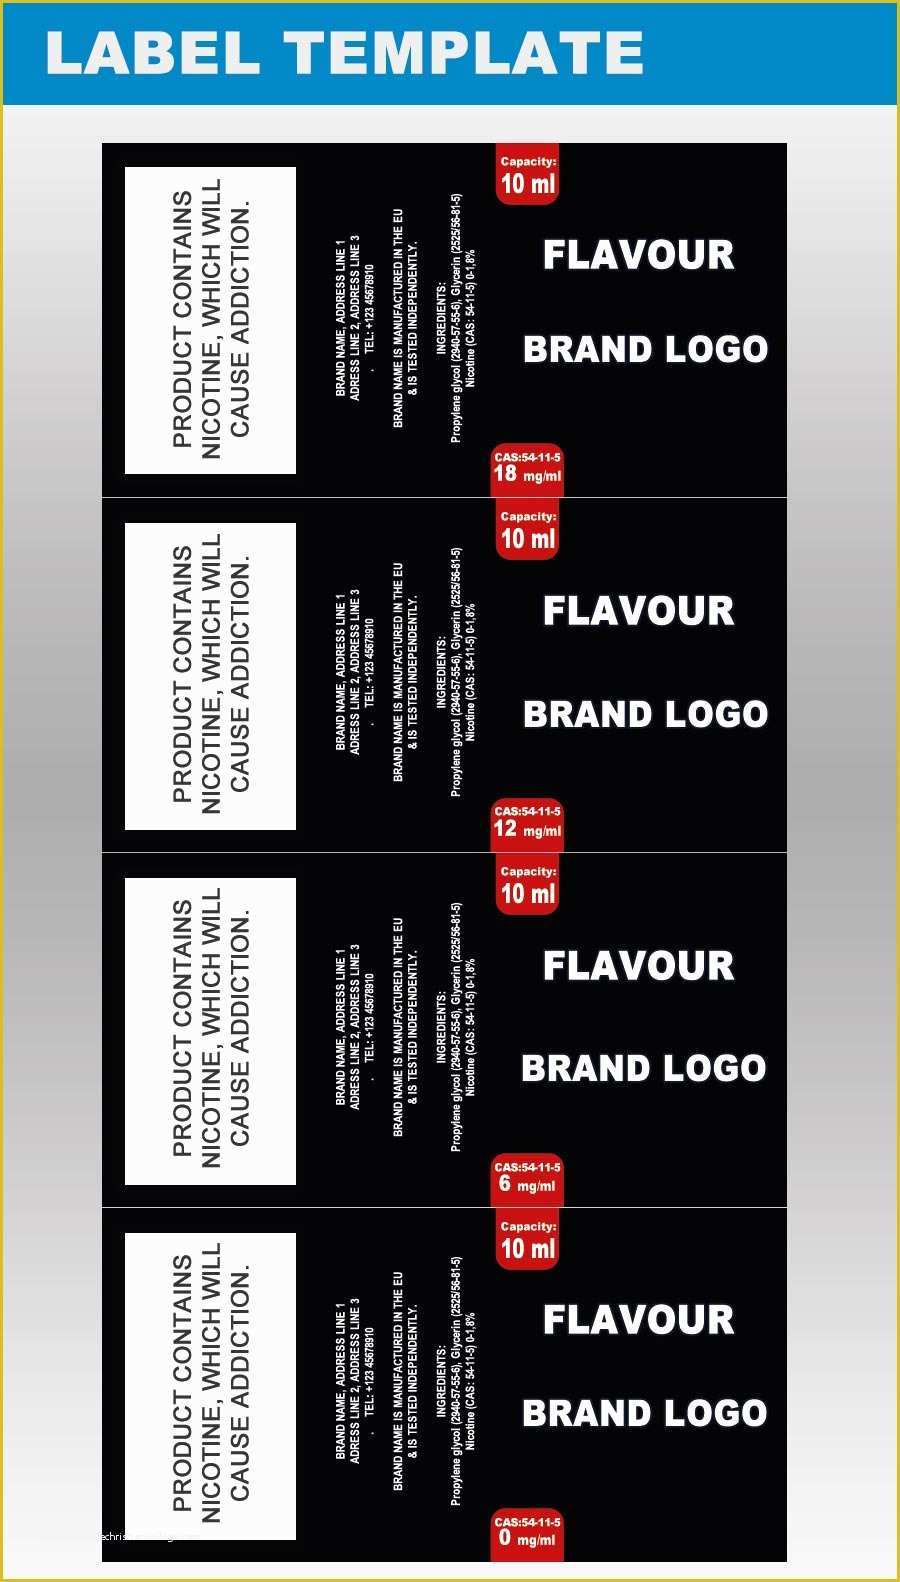 E Liquid Label Template Free Of Design Packaging Templates for E Juice Labels